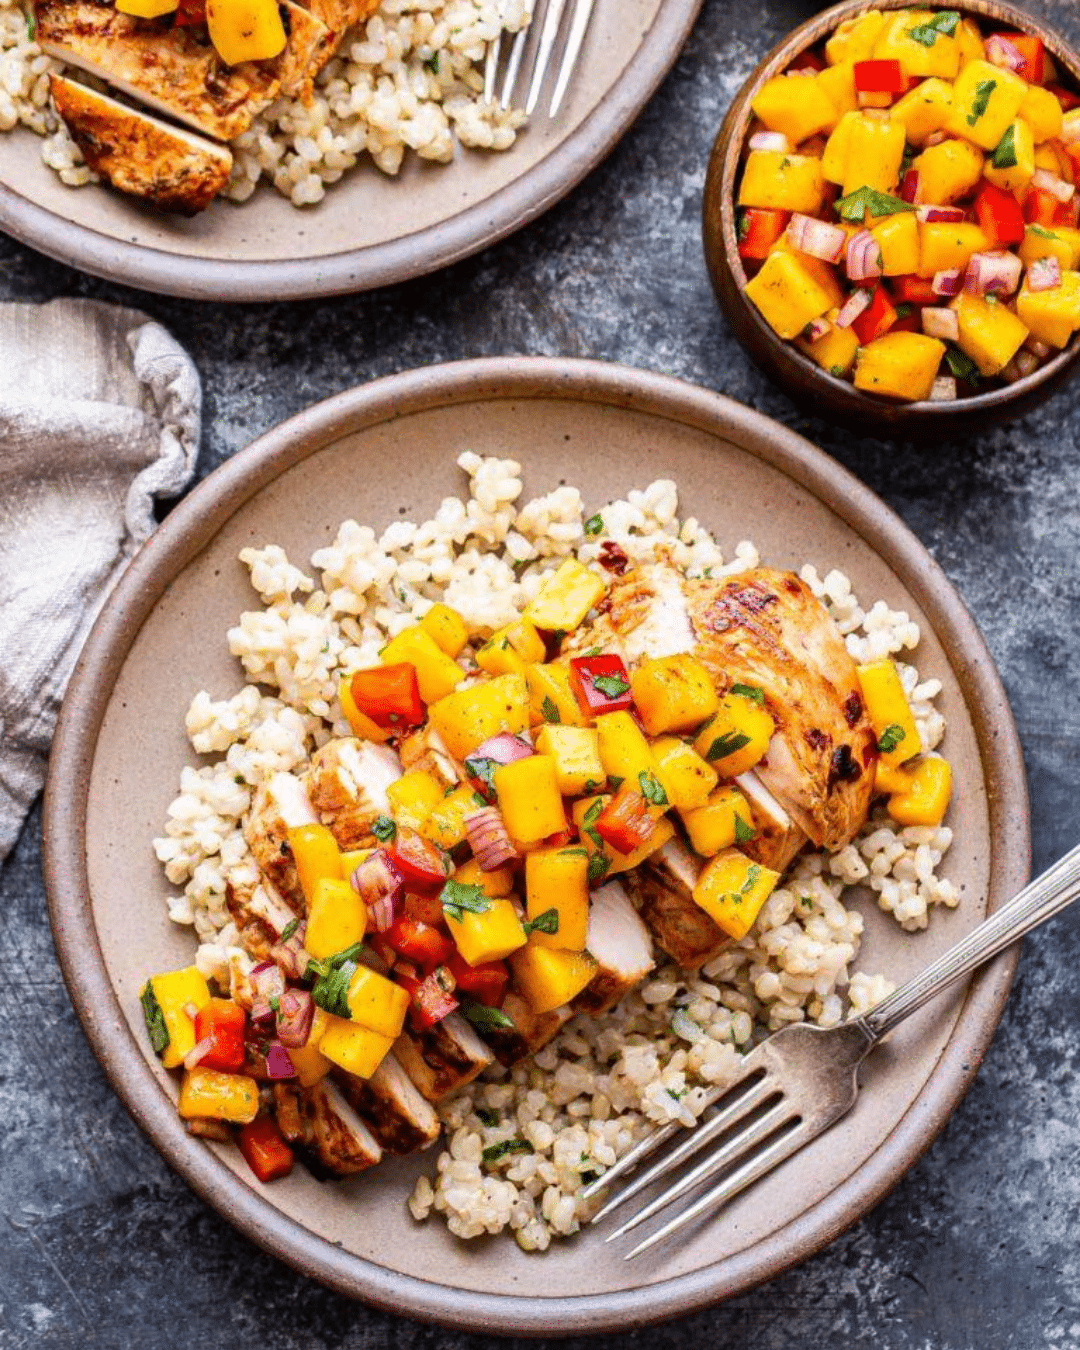 Chicken with mangos and rice